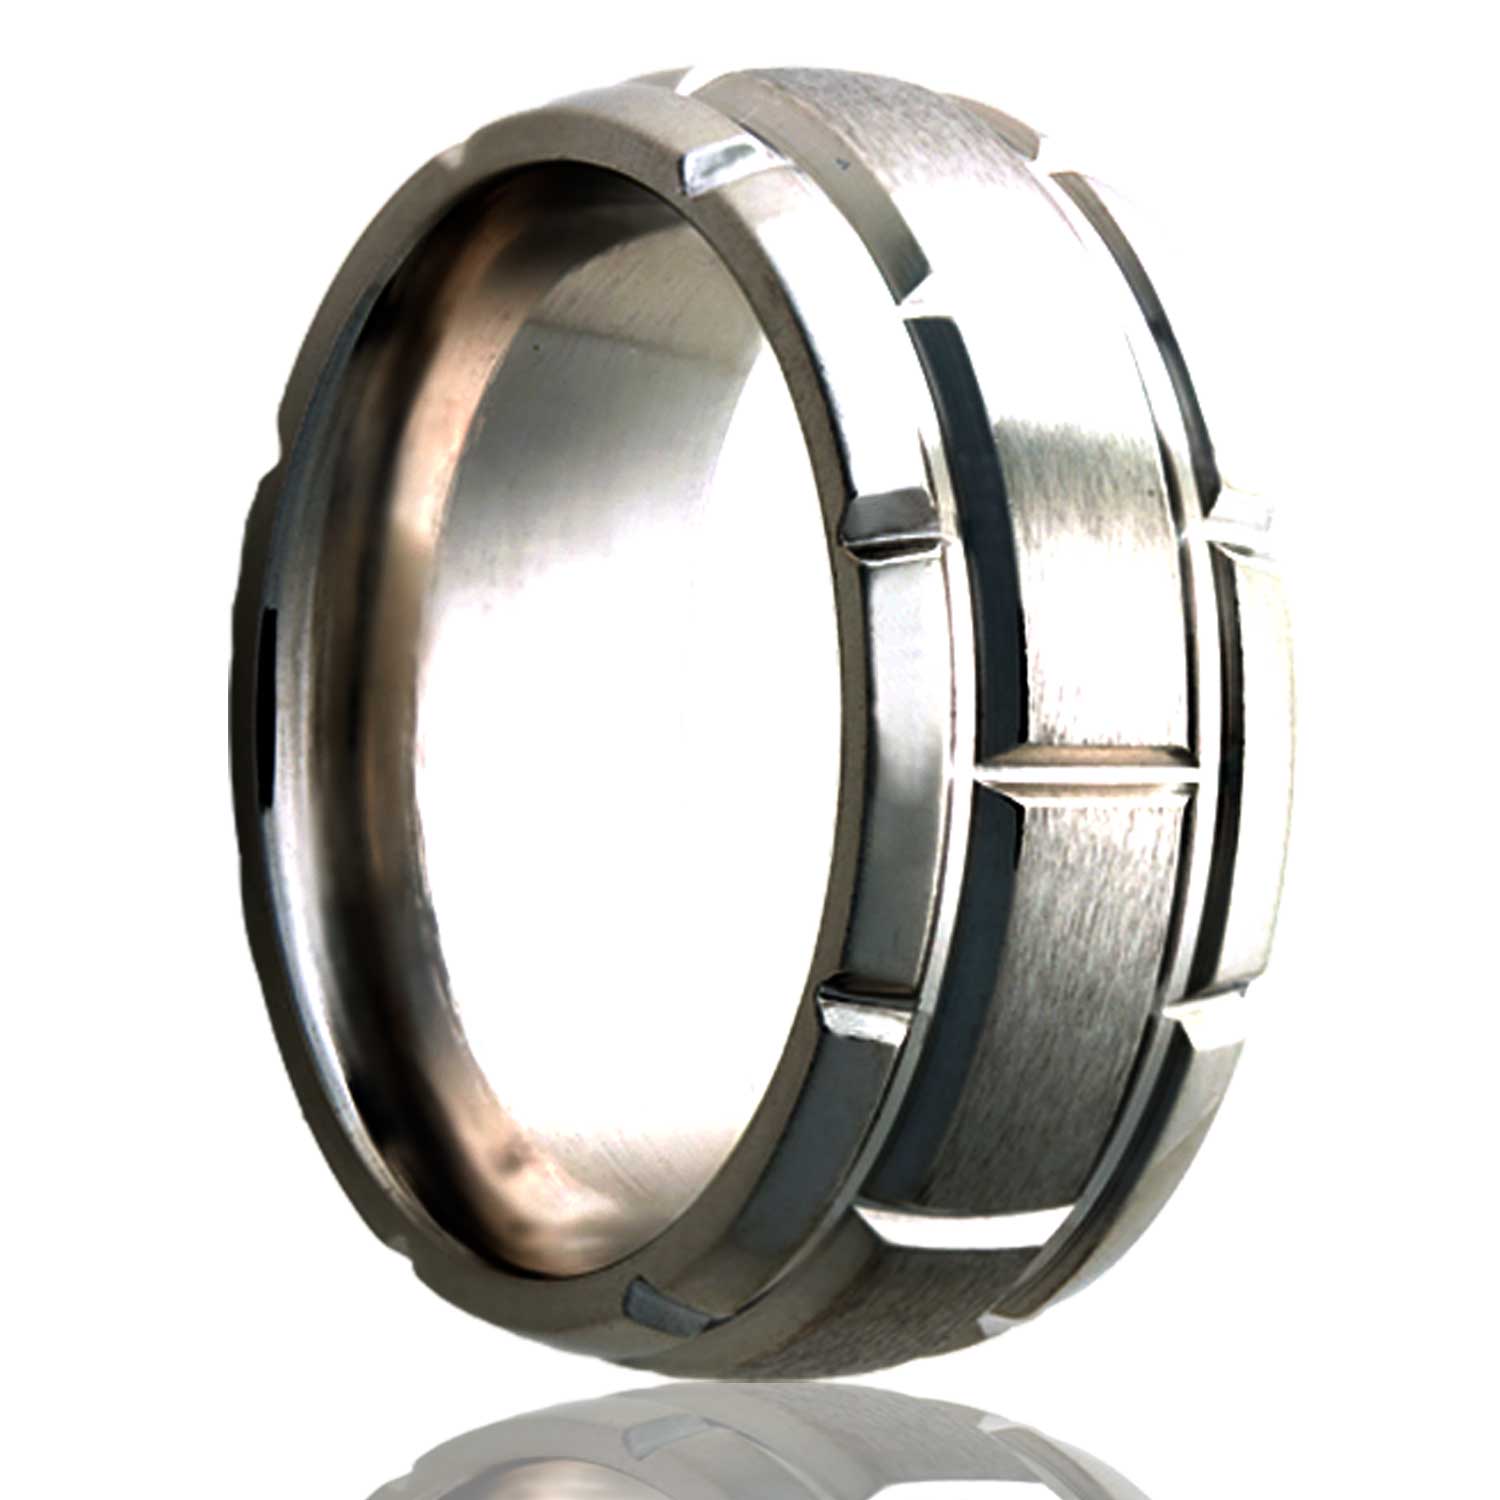 A brick pattern domed satin finish titanium wedding band displayed on a neutral white background.